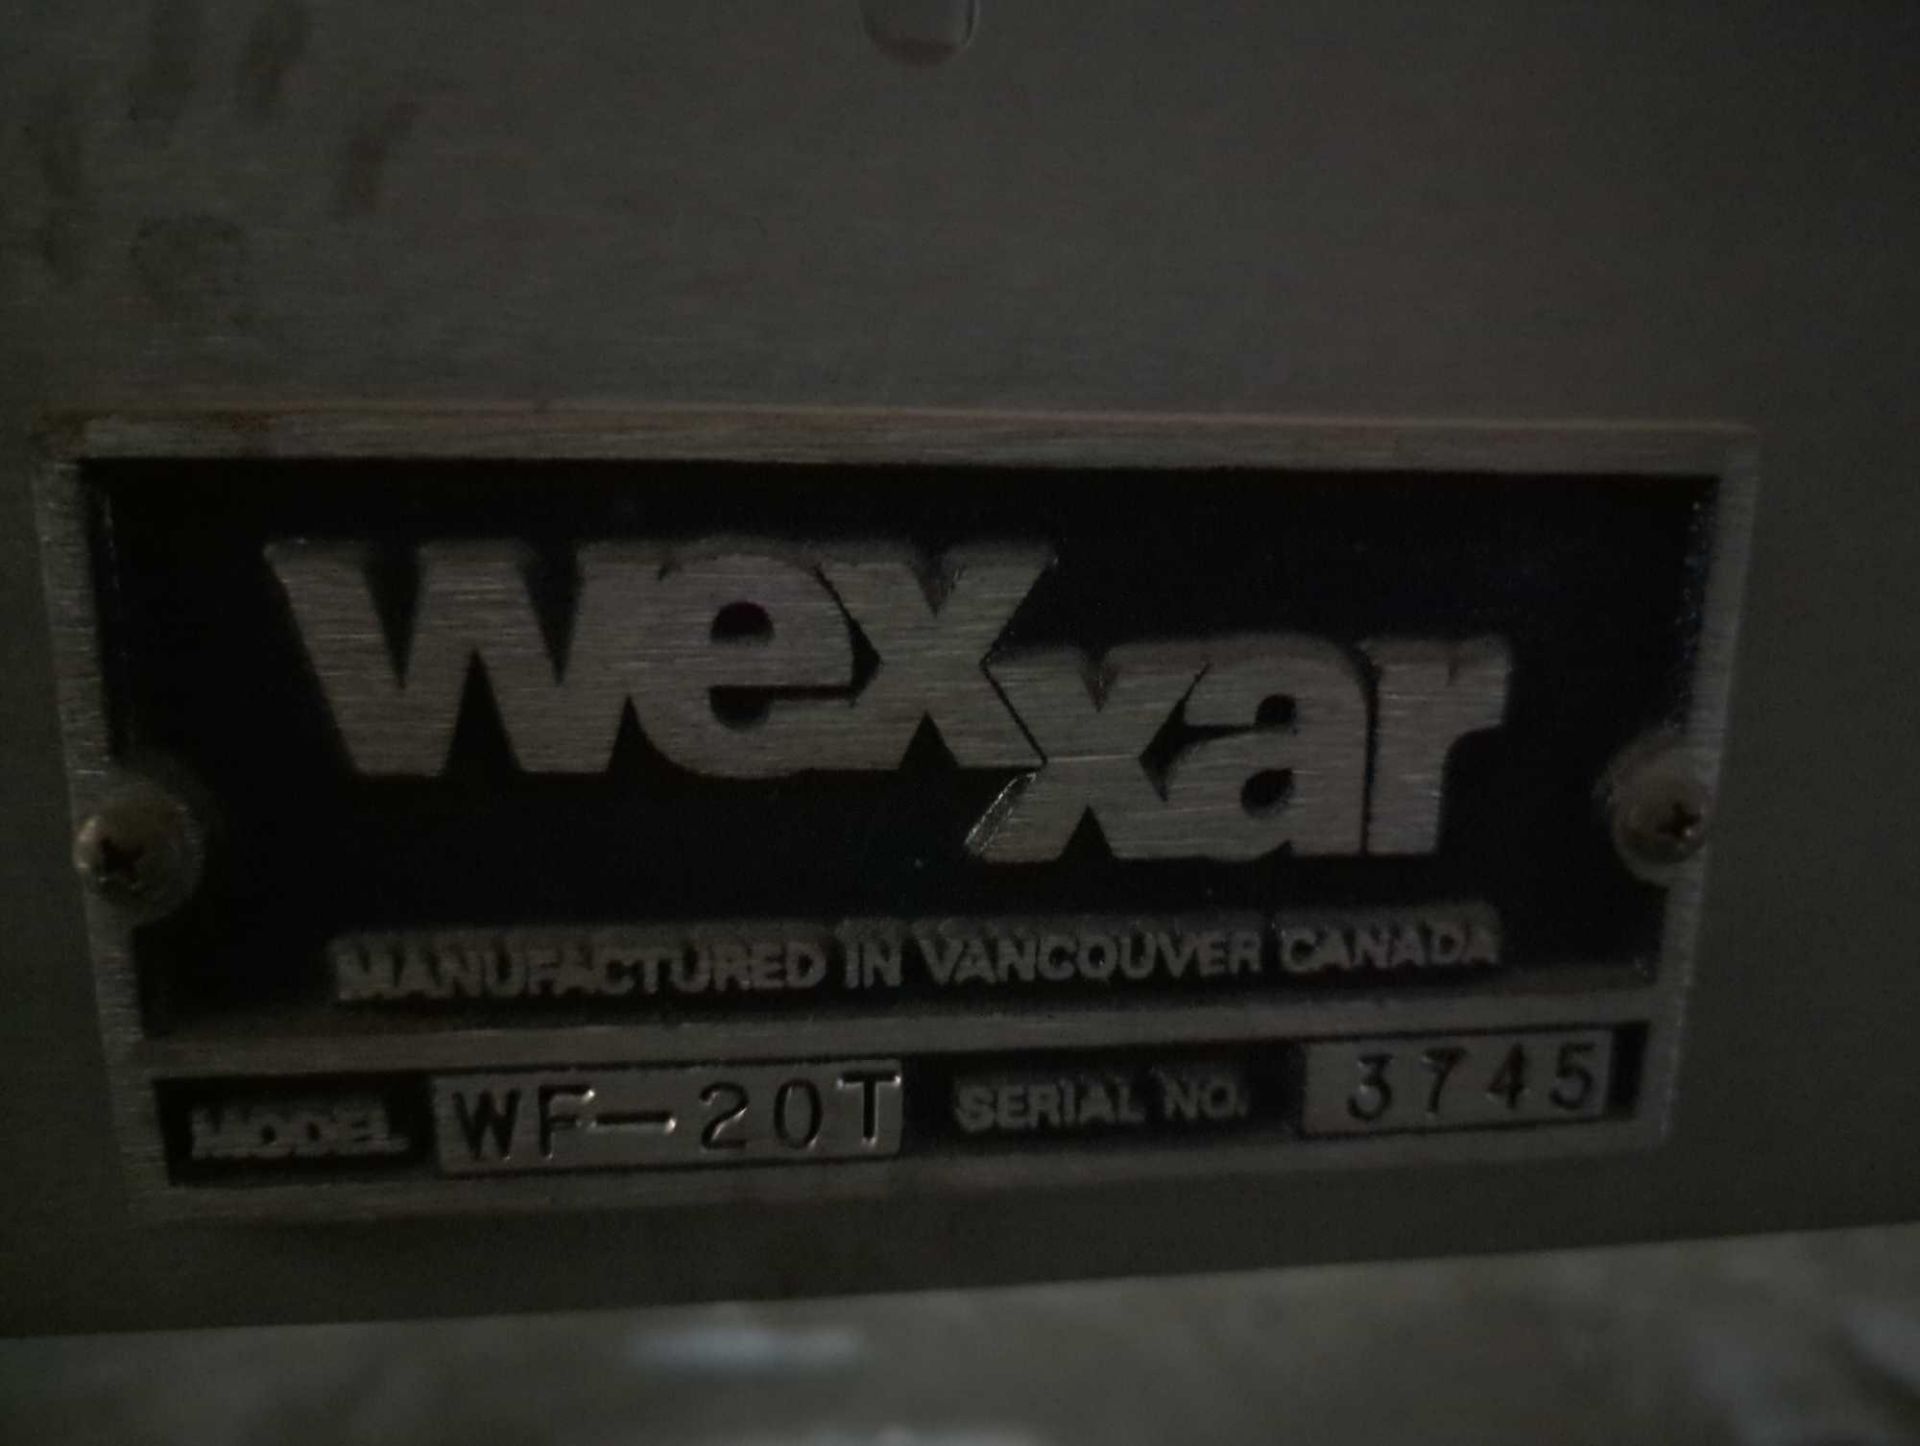 Wexxar Bel WF-20T Automatic Tape Bottom Case Erector - Image 8 of 8